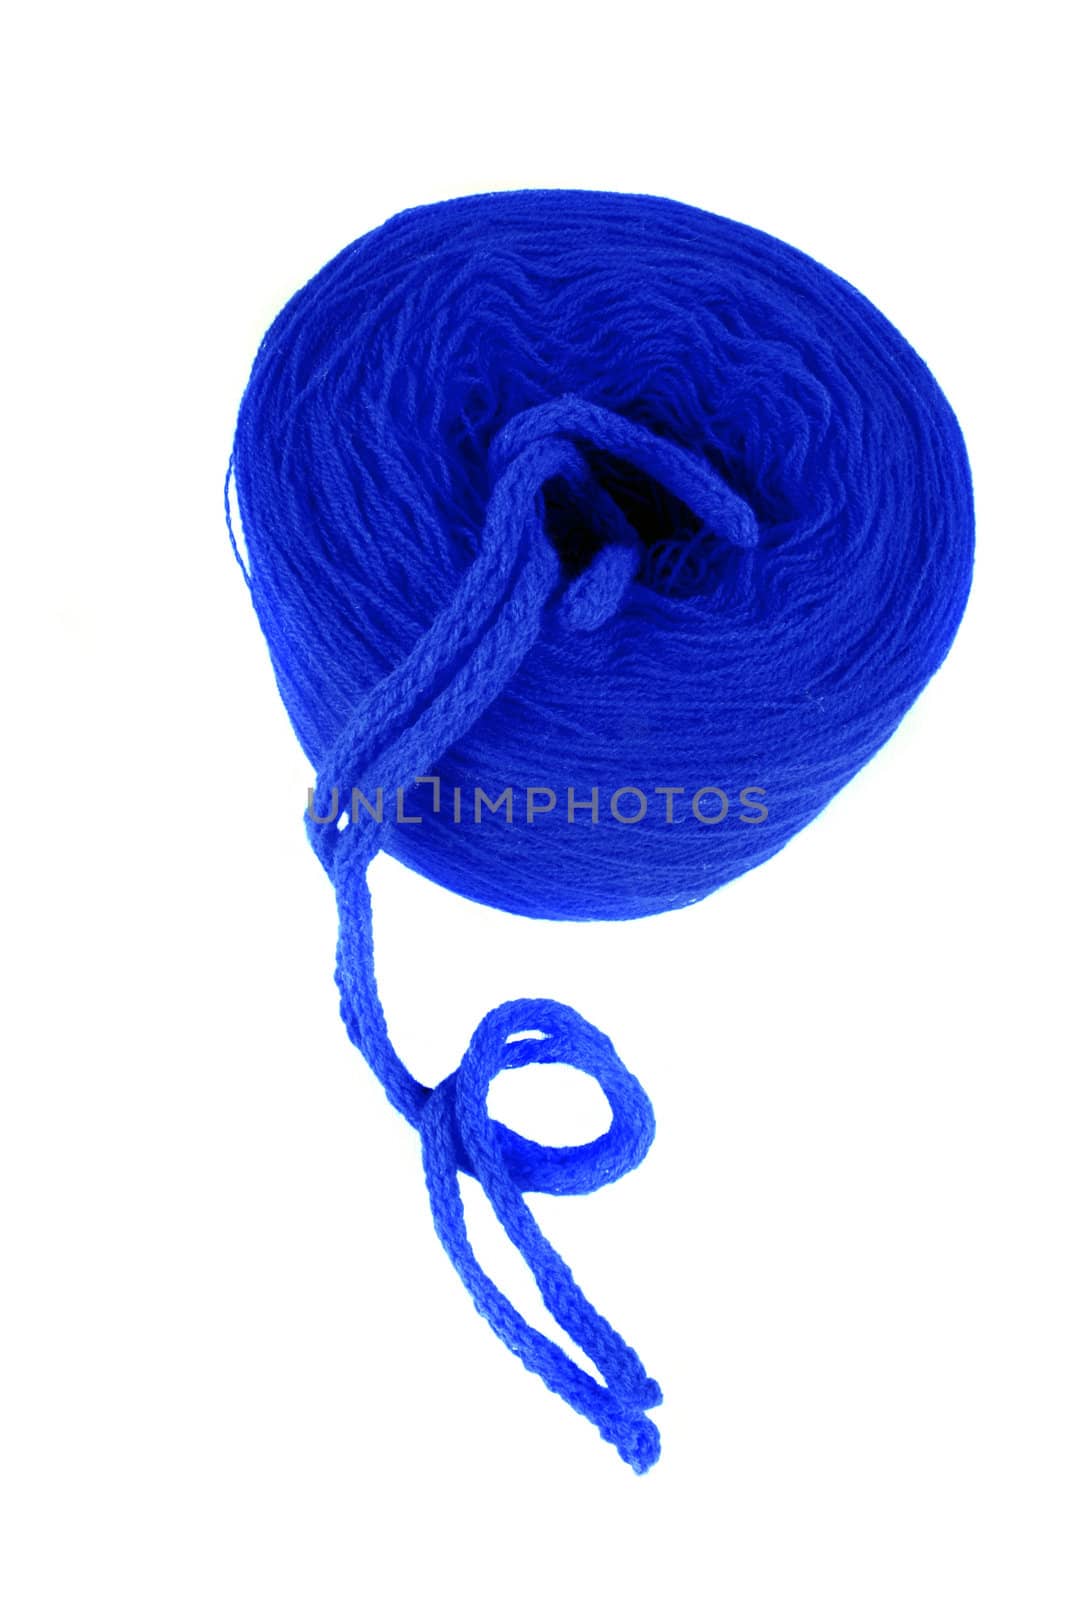 A spindle of blue wool, on white background.